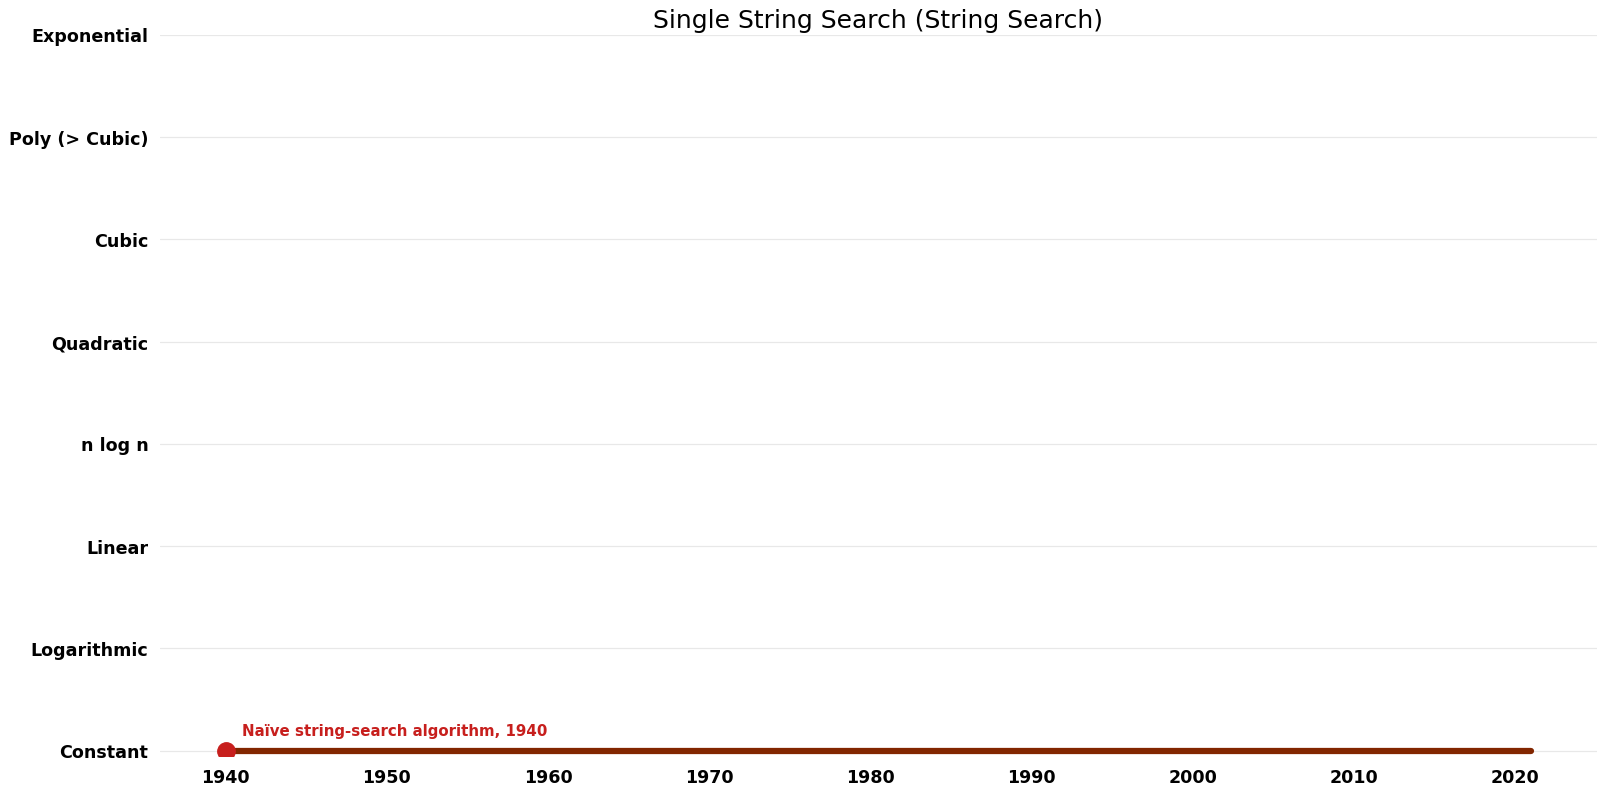 String Search - Single String Search - Space.png